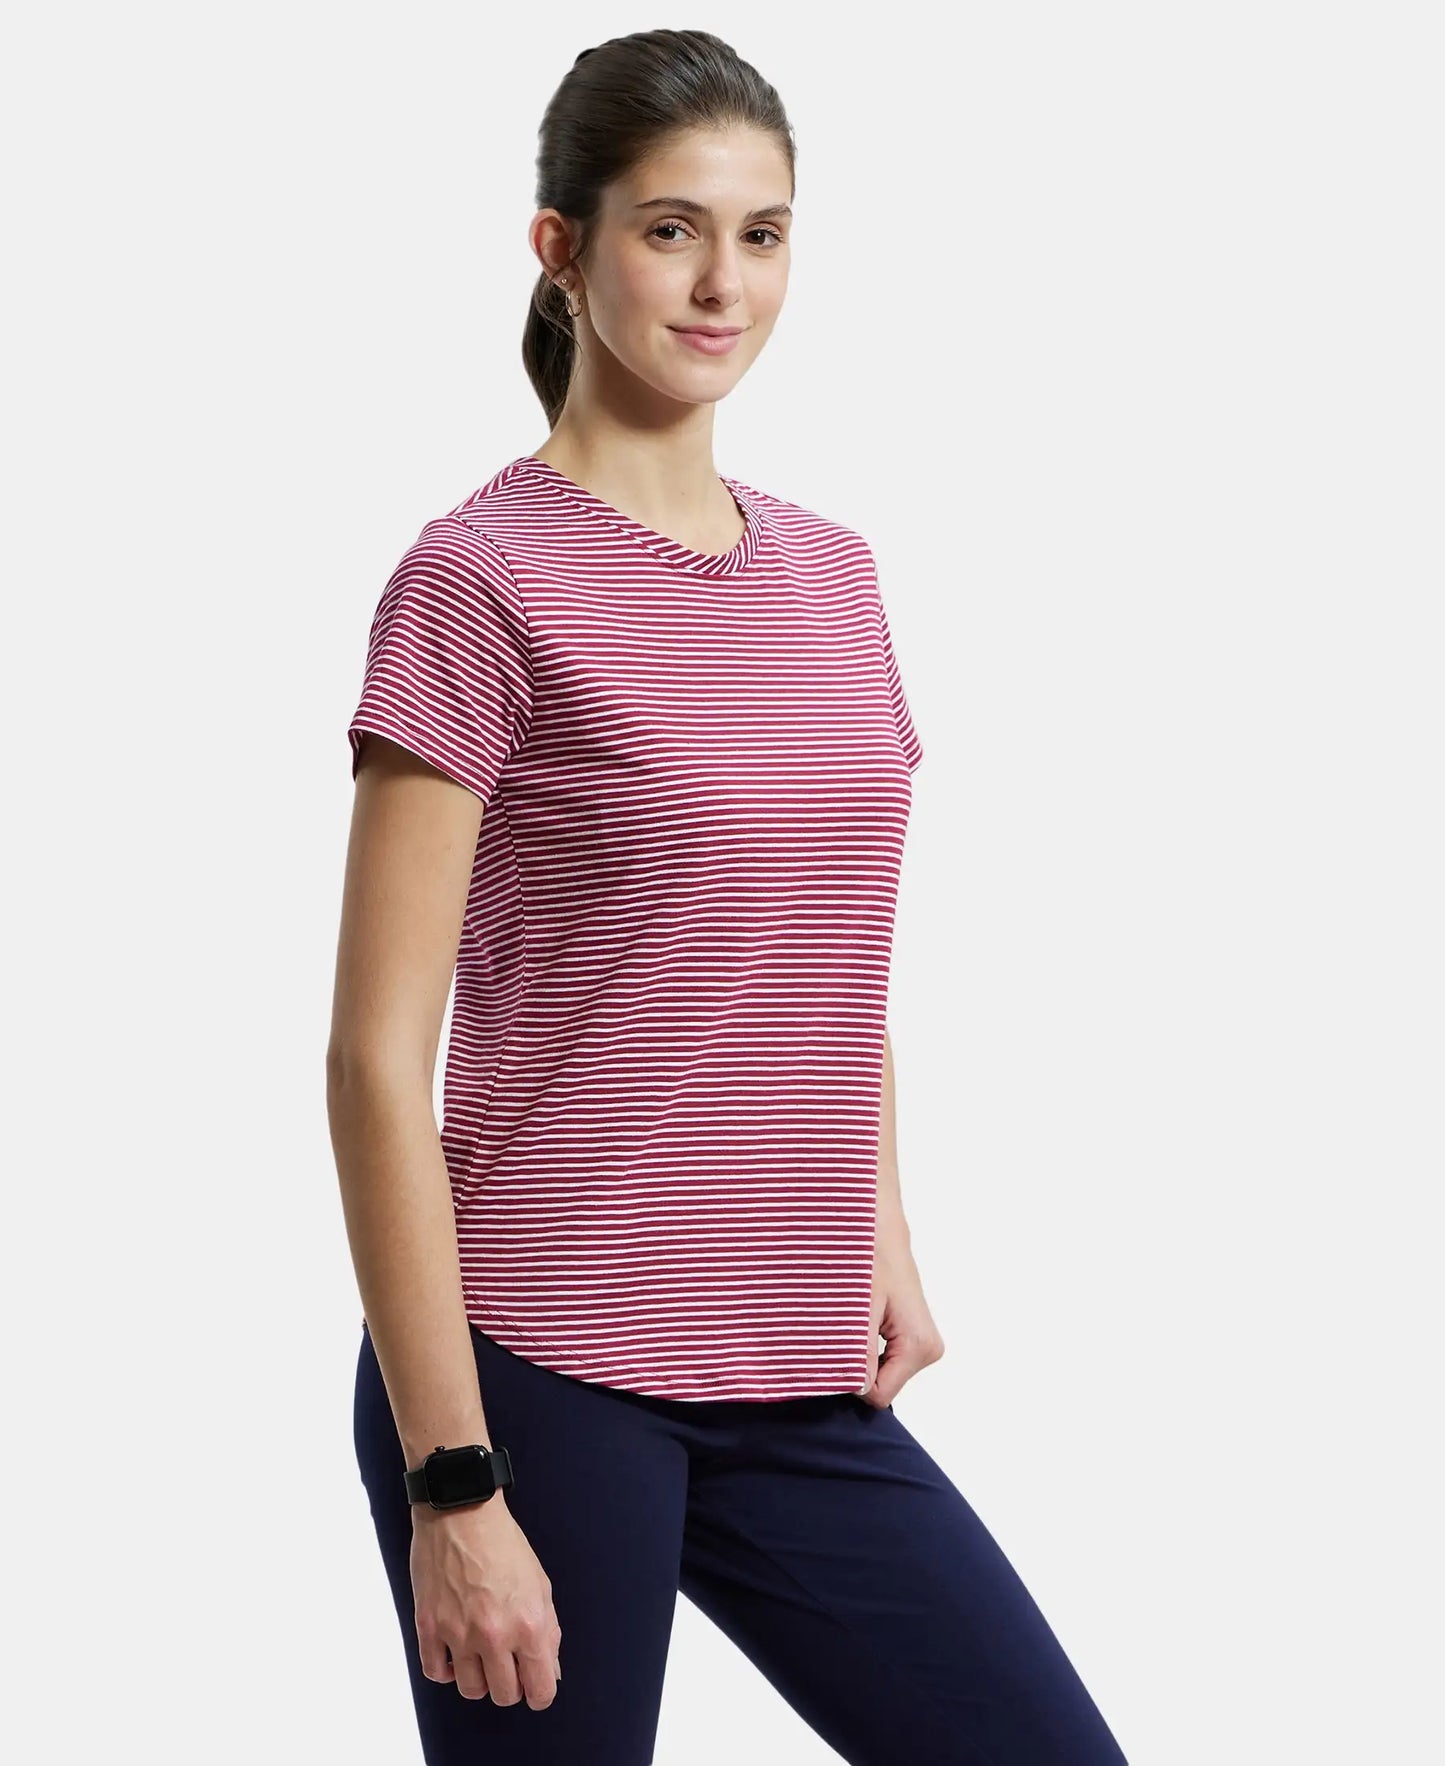 Super Combed Cotton Stripe Fabric Relaxed Fit Round Neck Half Sleeve T-Shirt with Curved Hem Styling - Red Plum-2